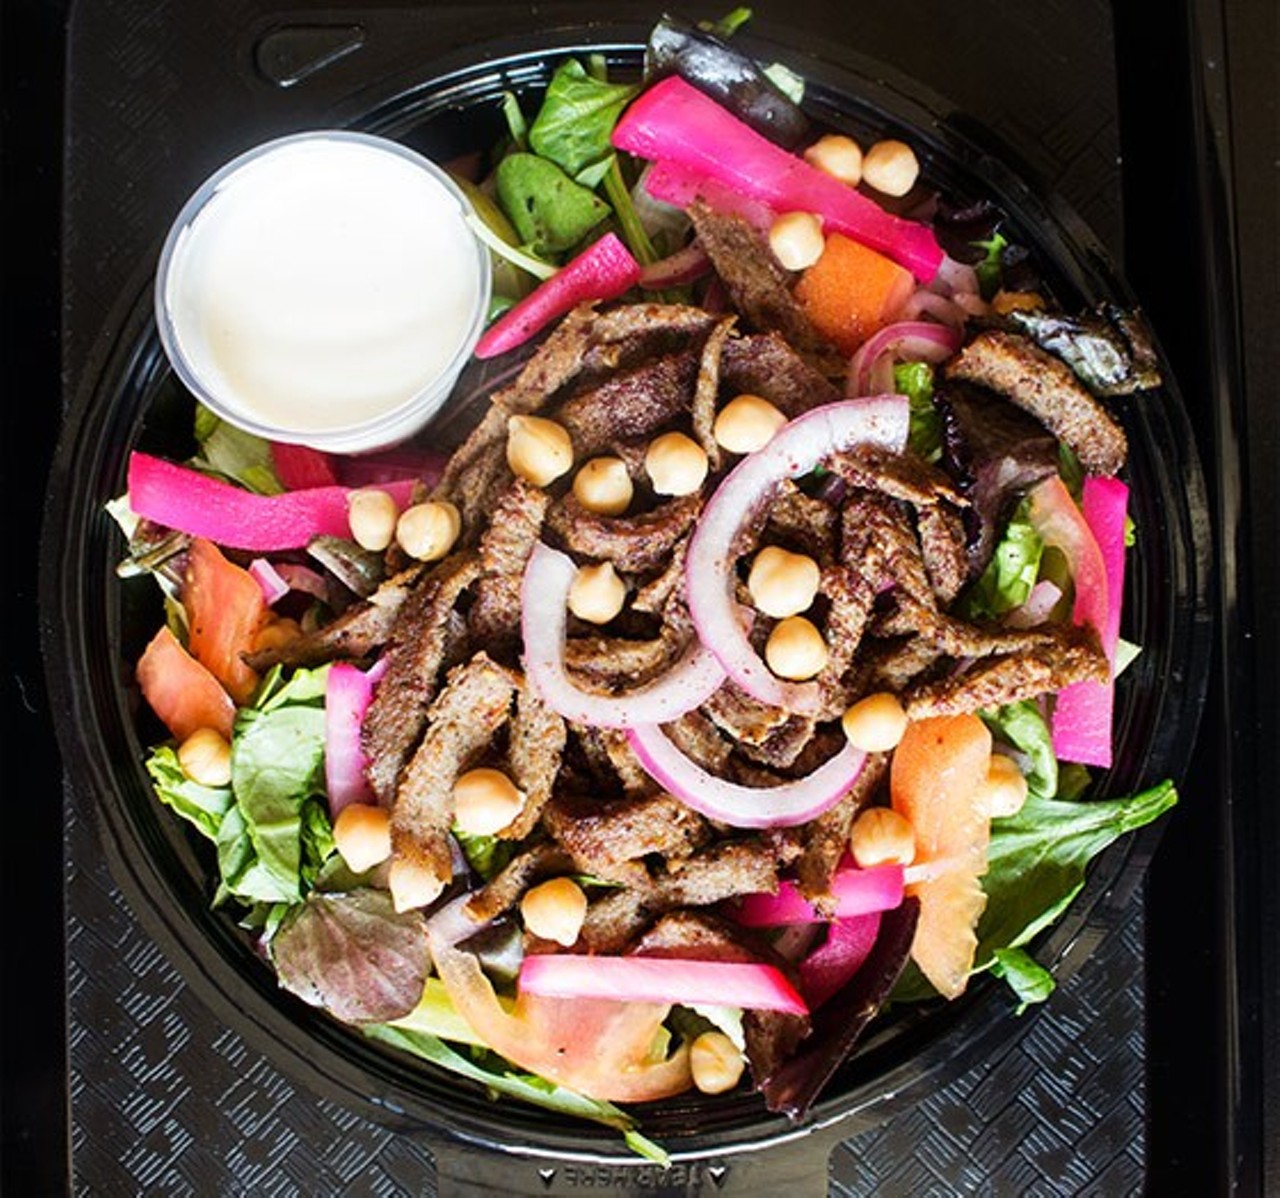 Medina Mediterranean Grill
(multiple locations including 1327 Washington Avenue, 314-241-1356)
&#147;Mediterranean food that melts your mouth, not your pocket. The beef shawarma is amazing here. The food is fast and the sauce is delicious.&#148; - Zach H.
Photo credit: Mabel Suen